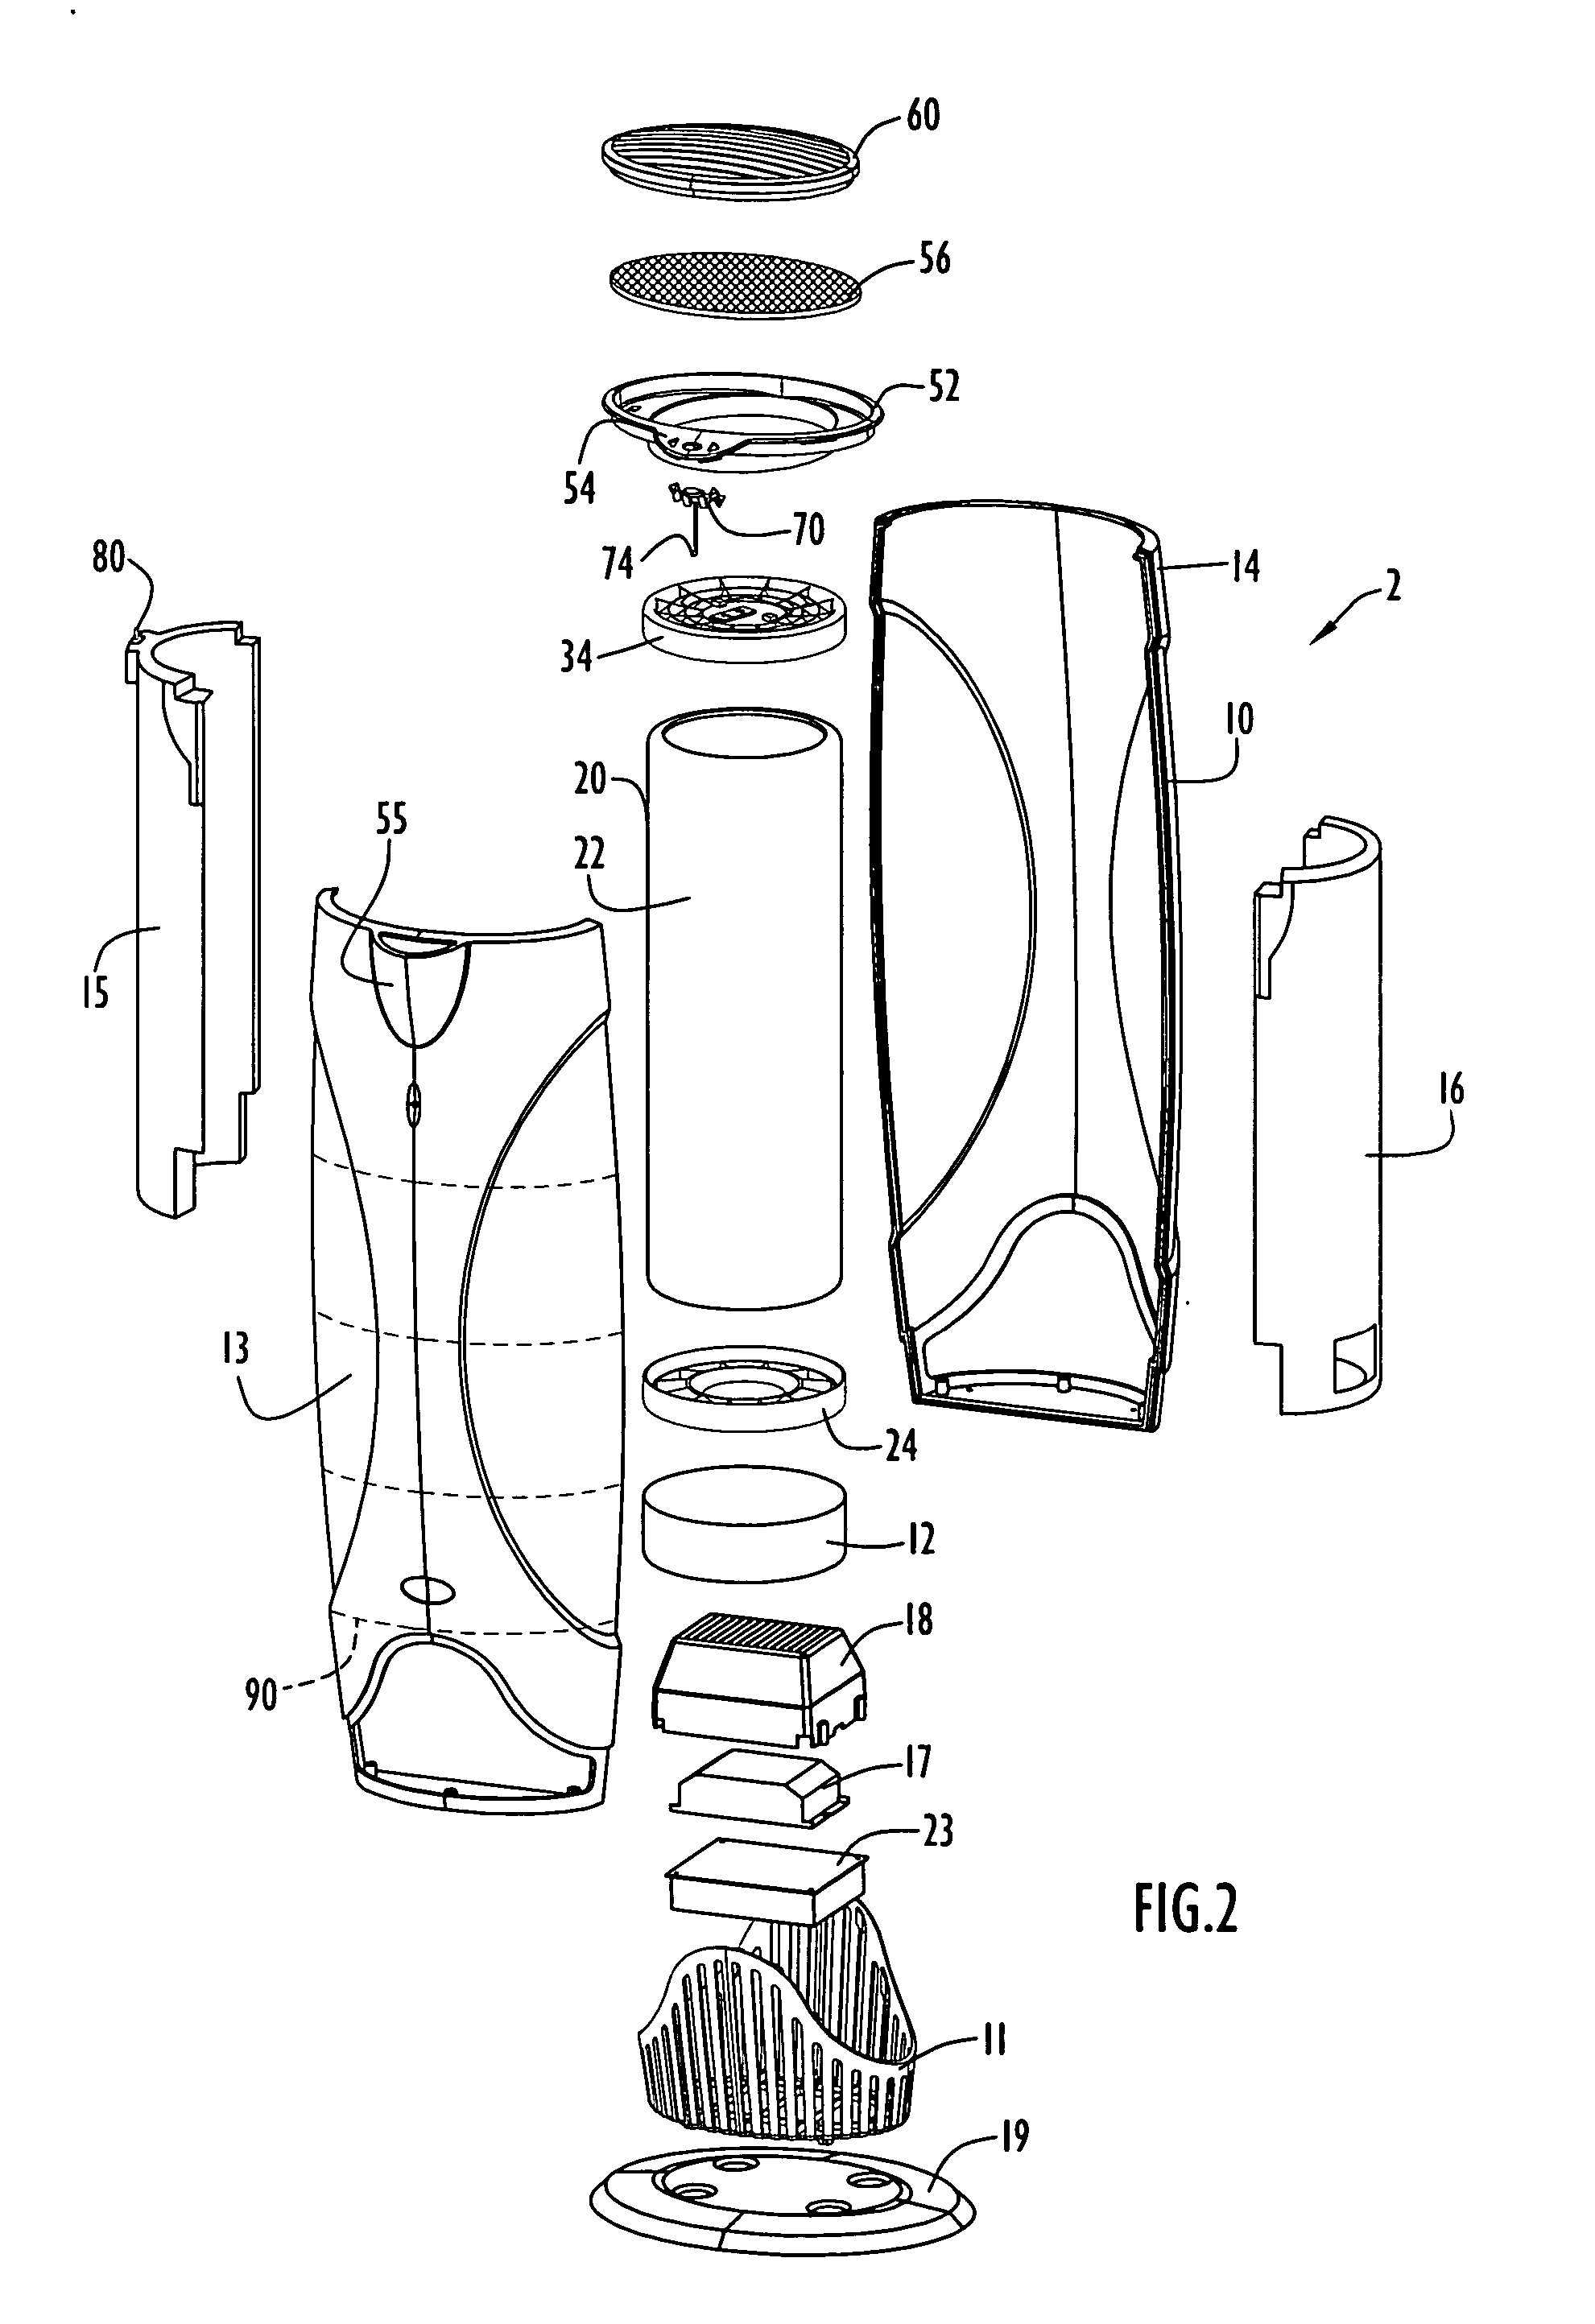 System for purifying and removing contaminants from gaseous fluids